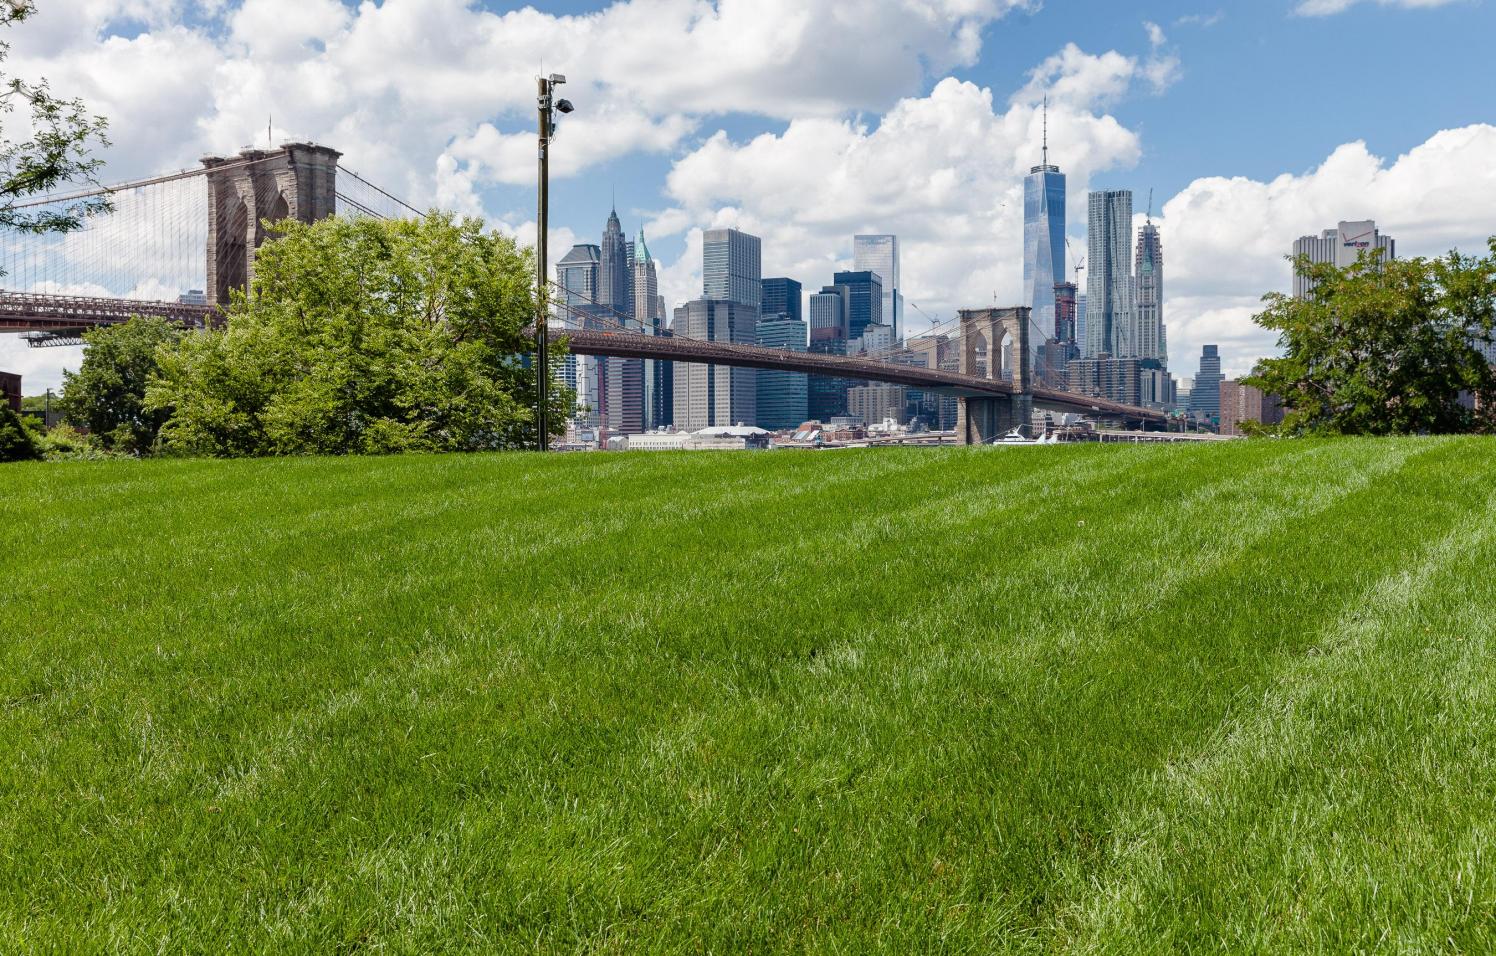 View of a lawn on a sunny day. Lower Manhattan is seen in the background.